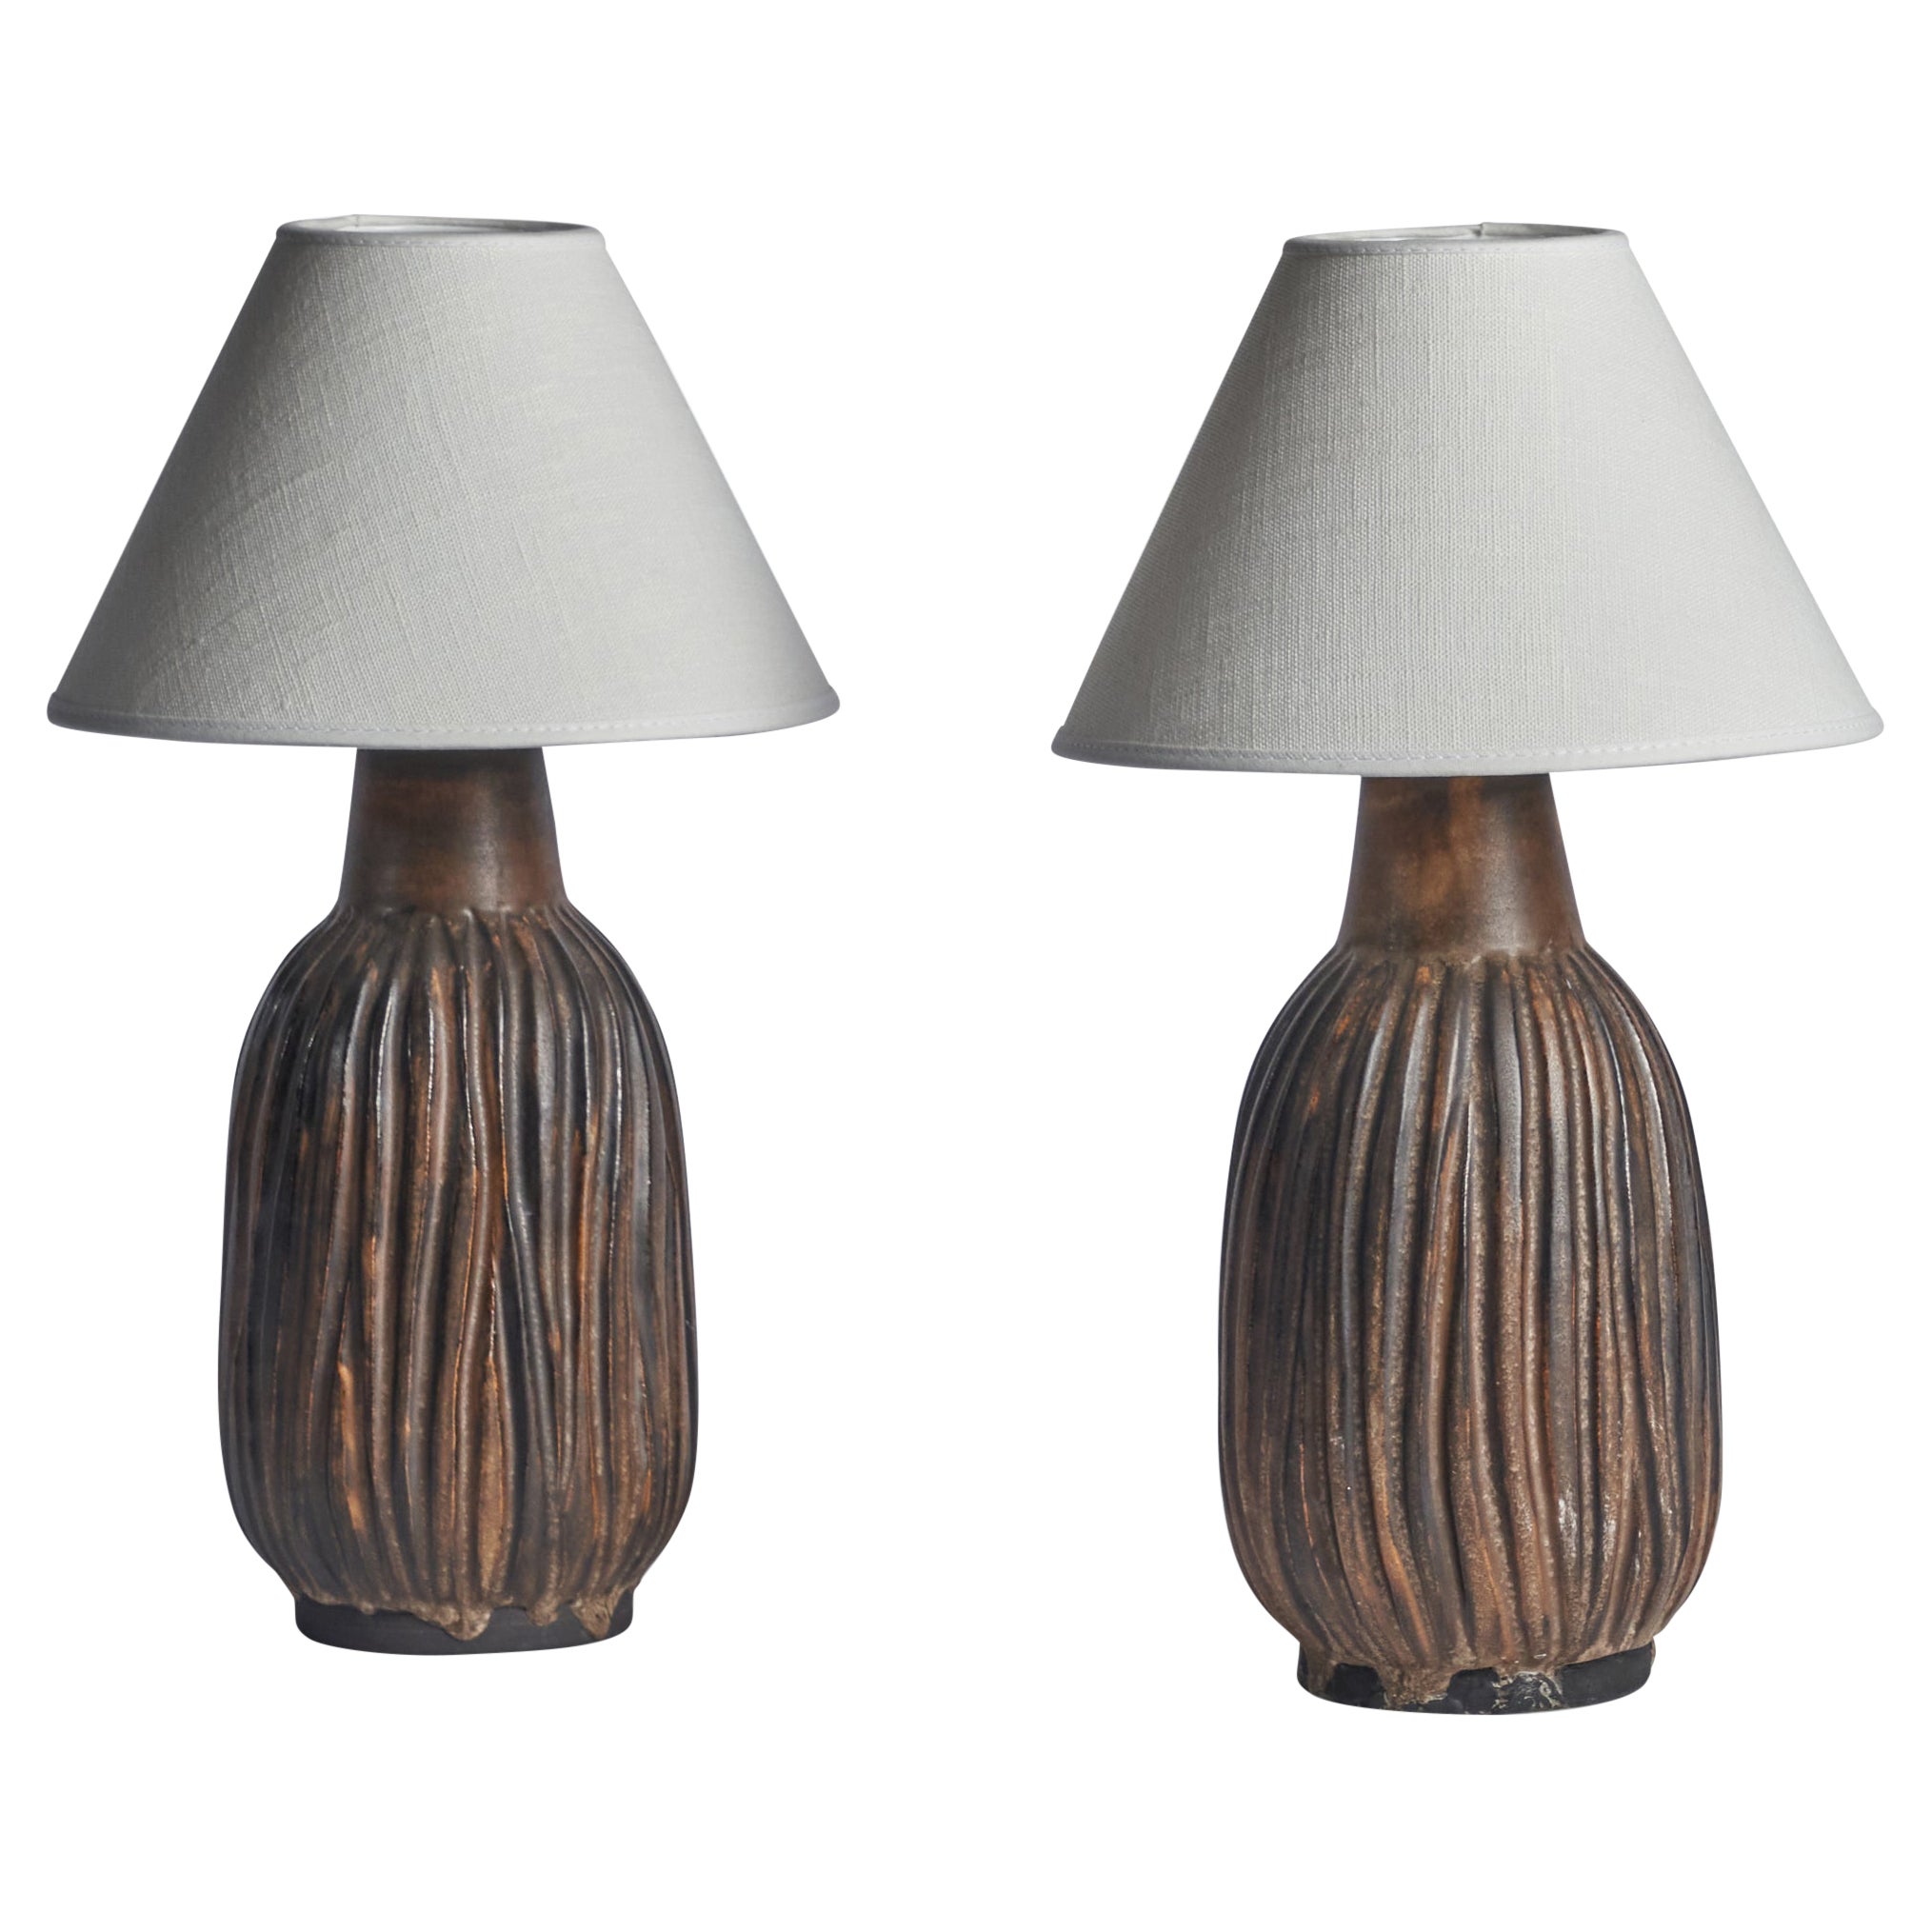 Irma Yourstone, Table Lamps, Stoneware, Sweden, 1960s